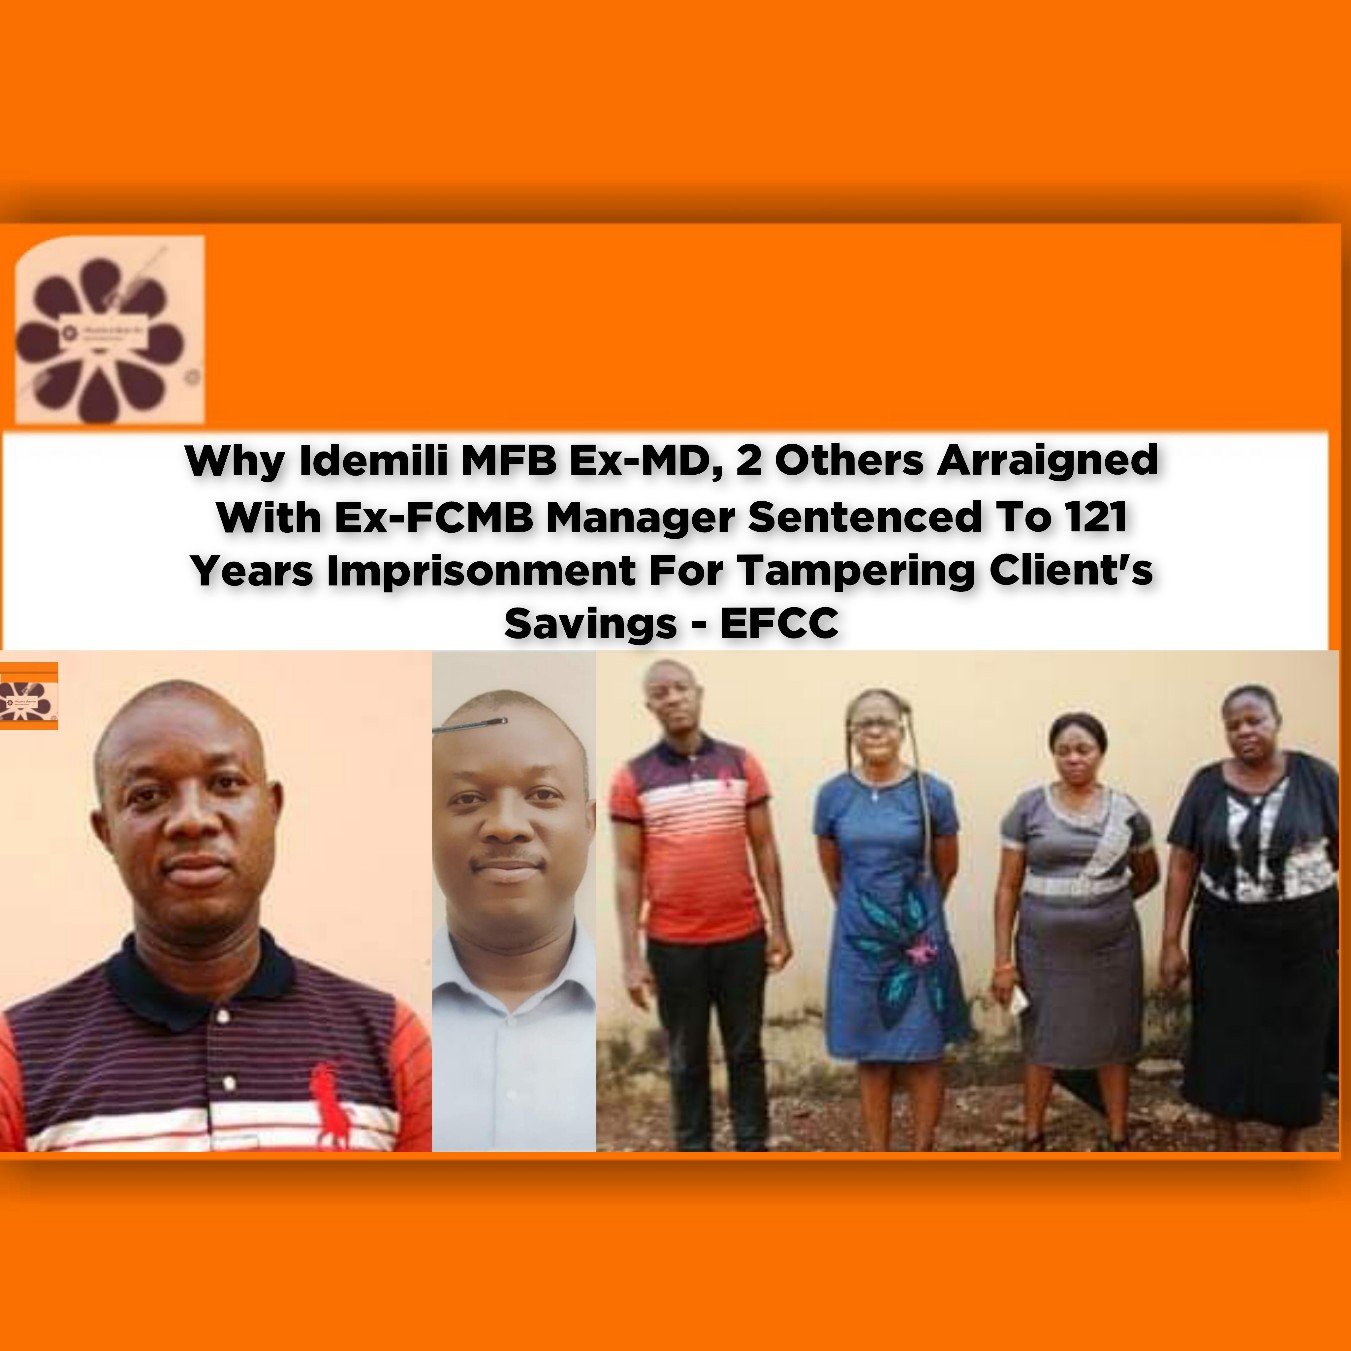 Why Idemili MFB Ex-MD, 2 Others Arraigned With Ex-FCMB Manager Sentenced To 121 Years Imprisonment For Tampering Client's Savings - EFCC ~ OsazuwaAkonedo #army